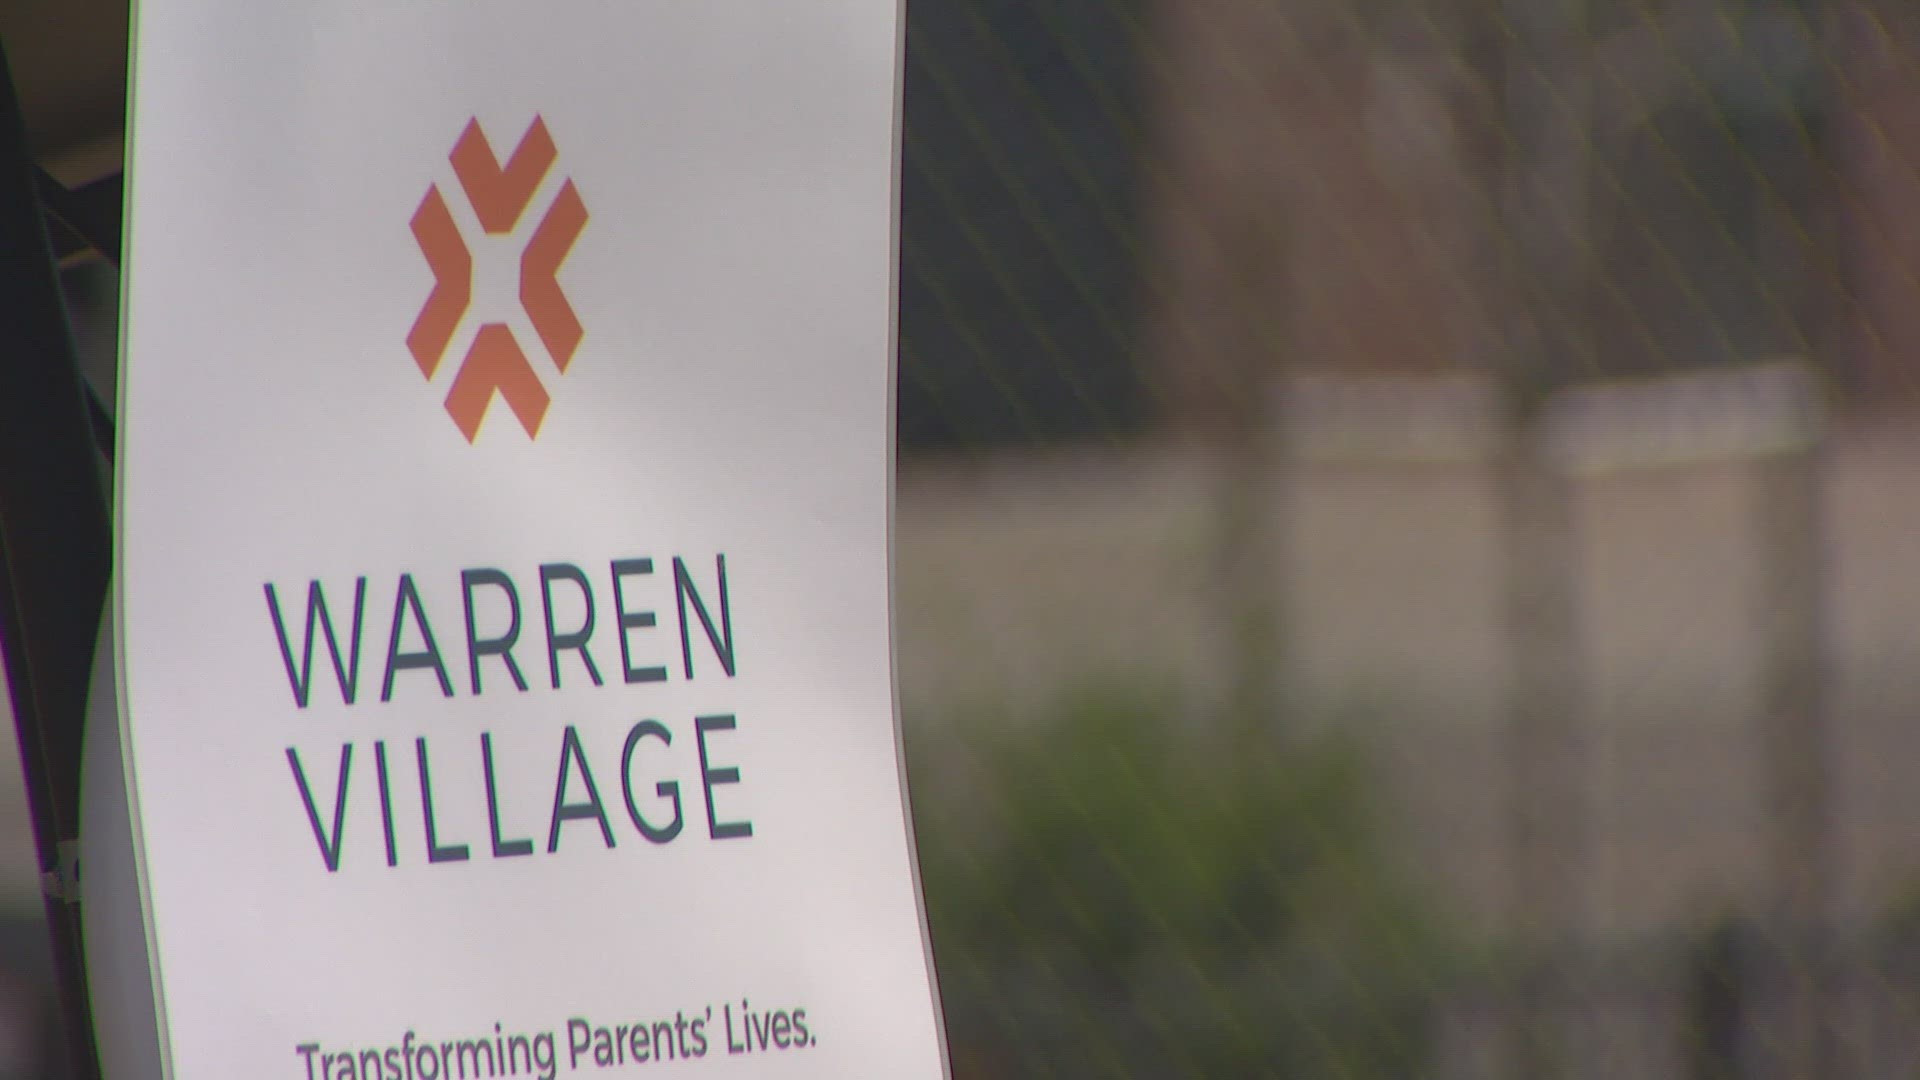 Warren Village at Alameda will provide 89 income-restricted apartments, adult education services and have the first early learning center in the state.